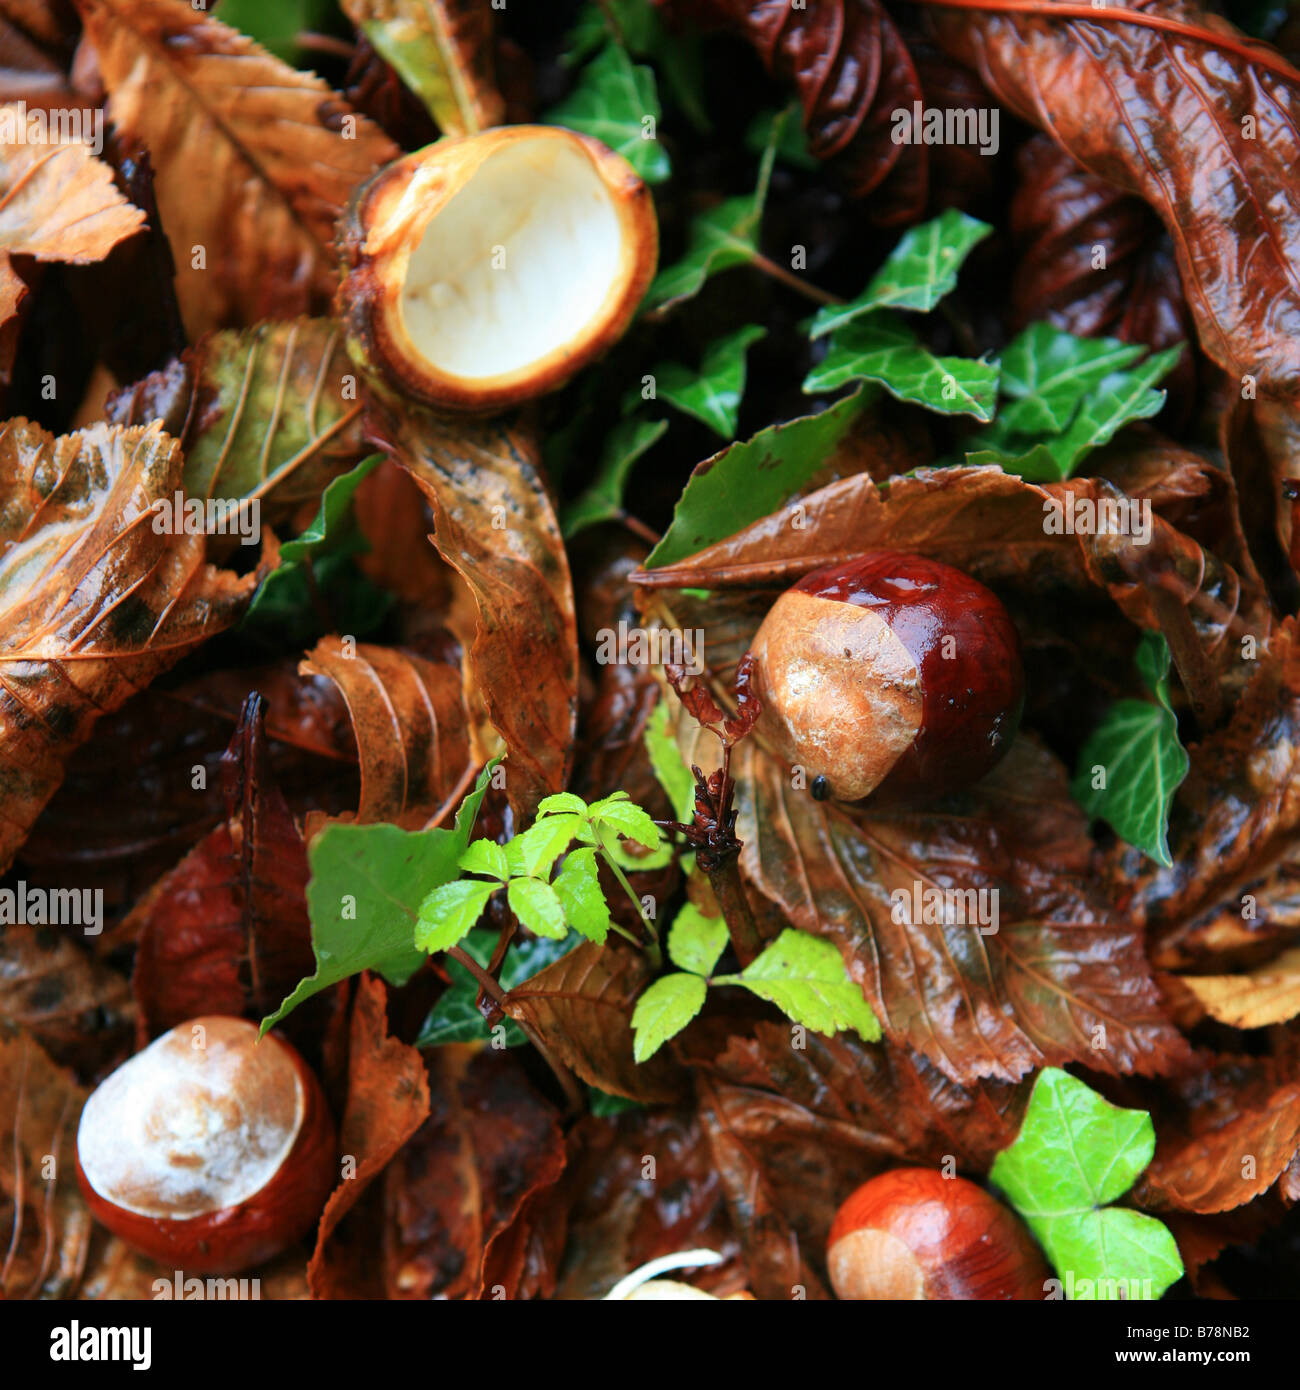 Conkers (horse chestnuts) among the fallen leaves on a wet autumn day in England. Stock Photo